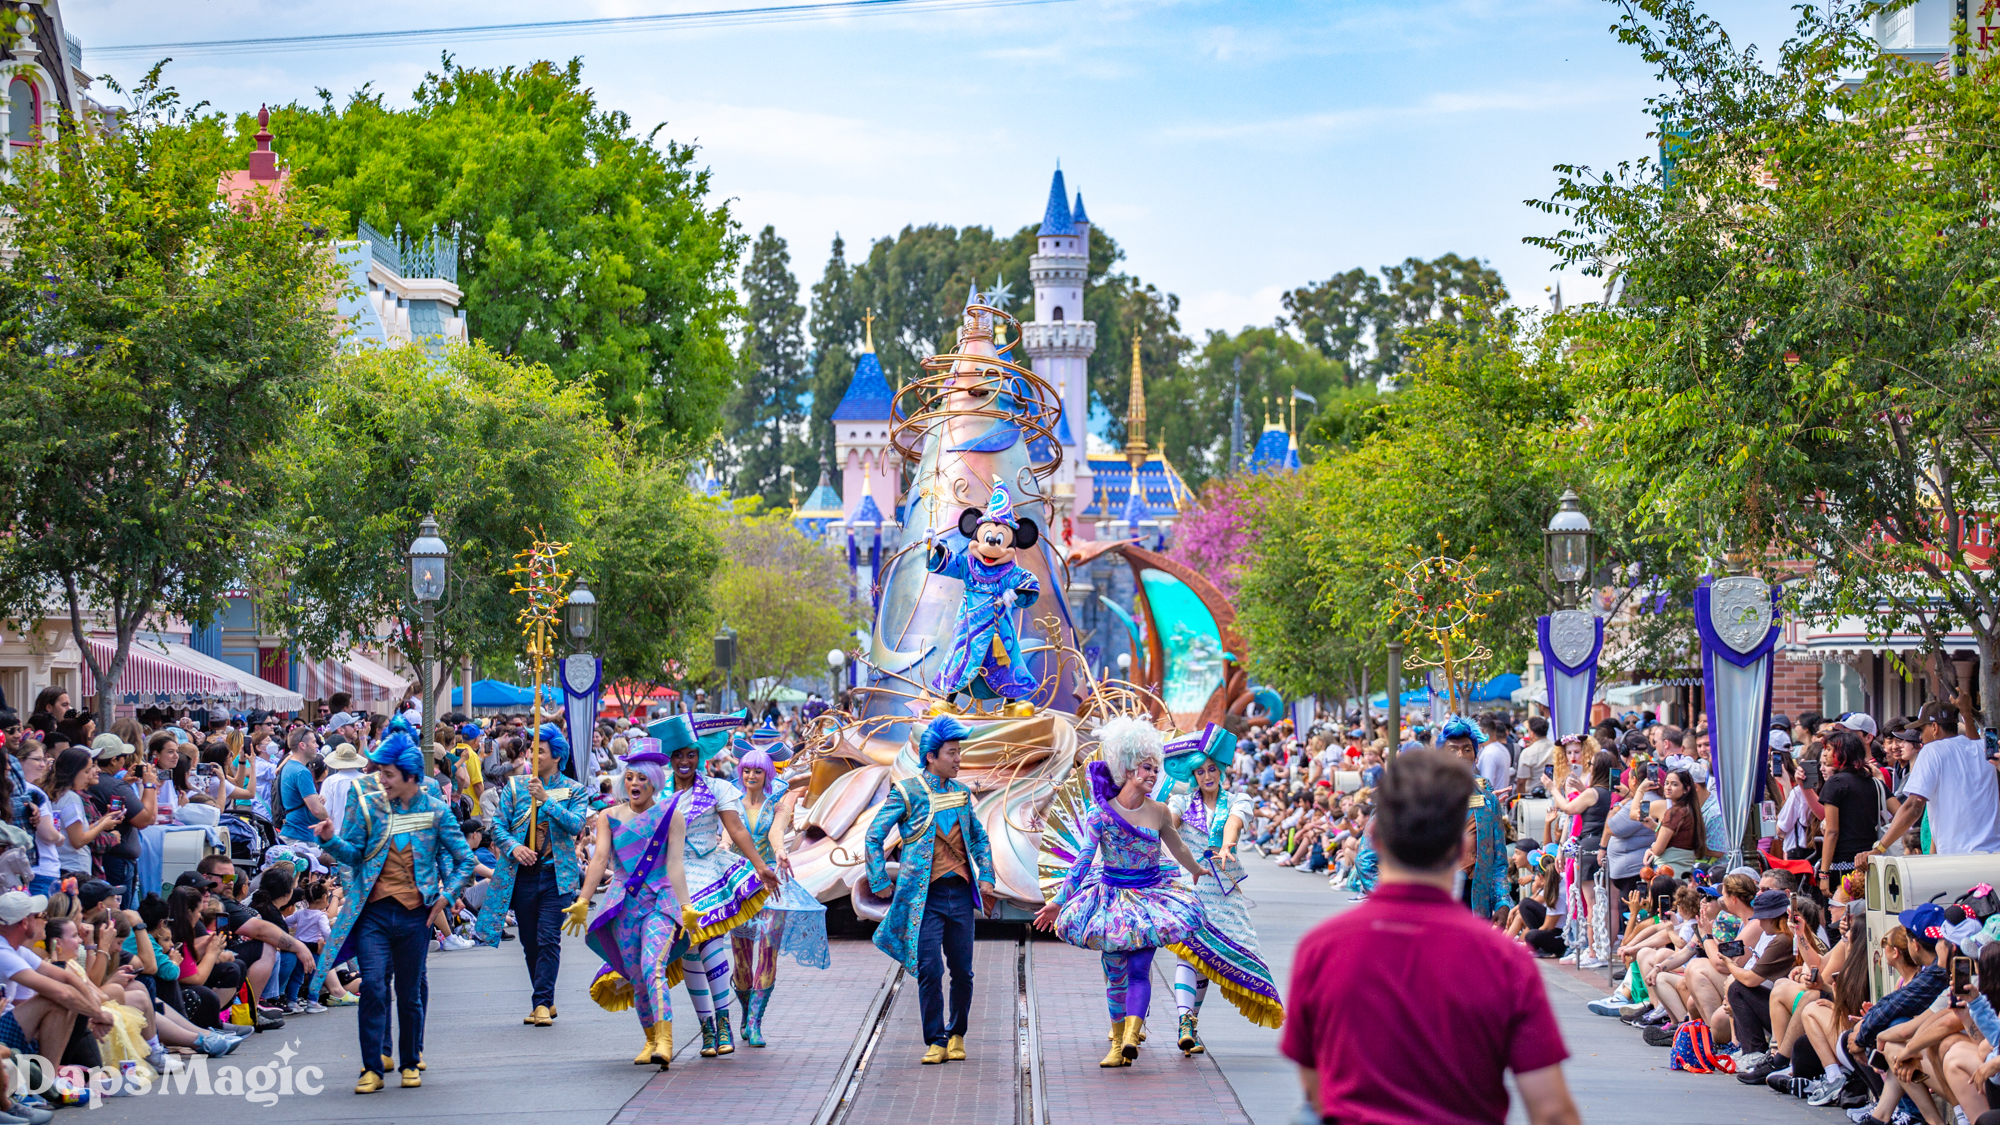 Character Entertainers at Disneyland Resort Look to Unionize With Actors’ Equity